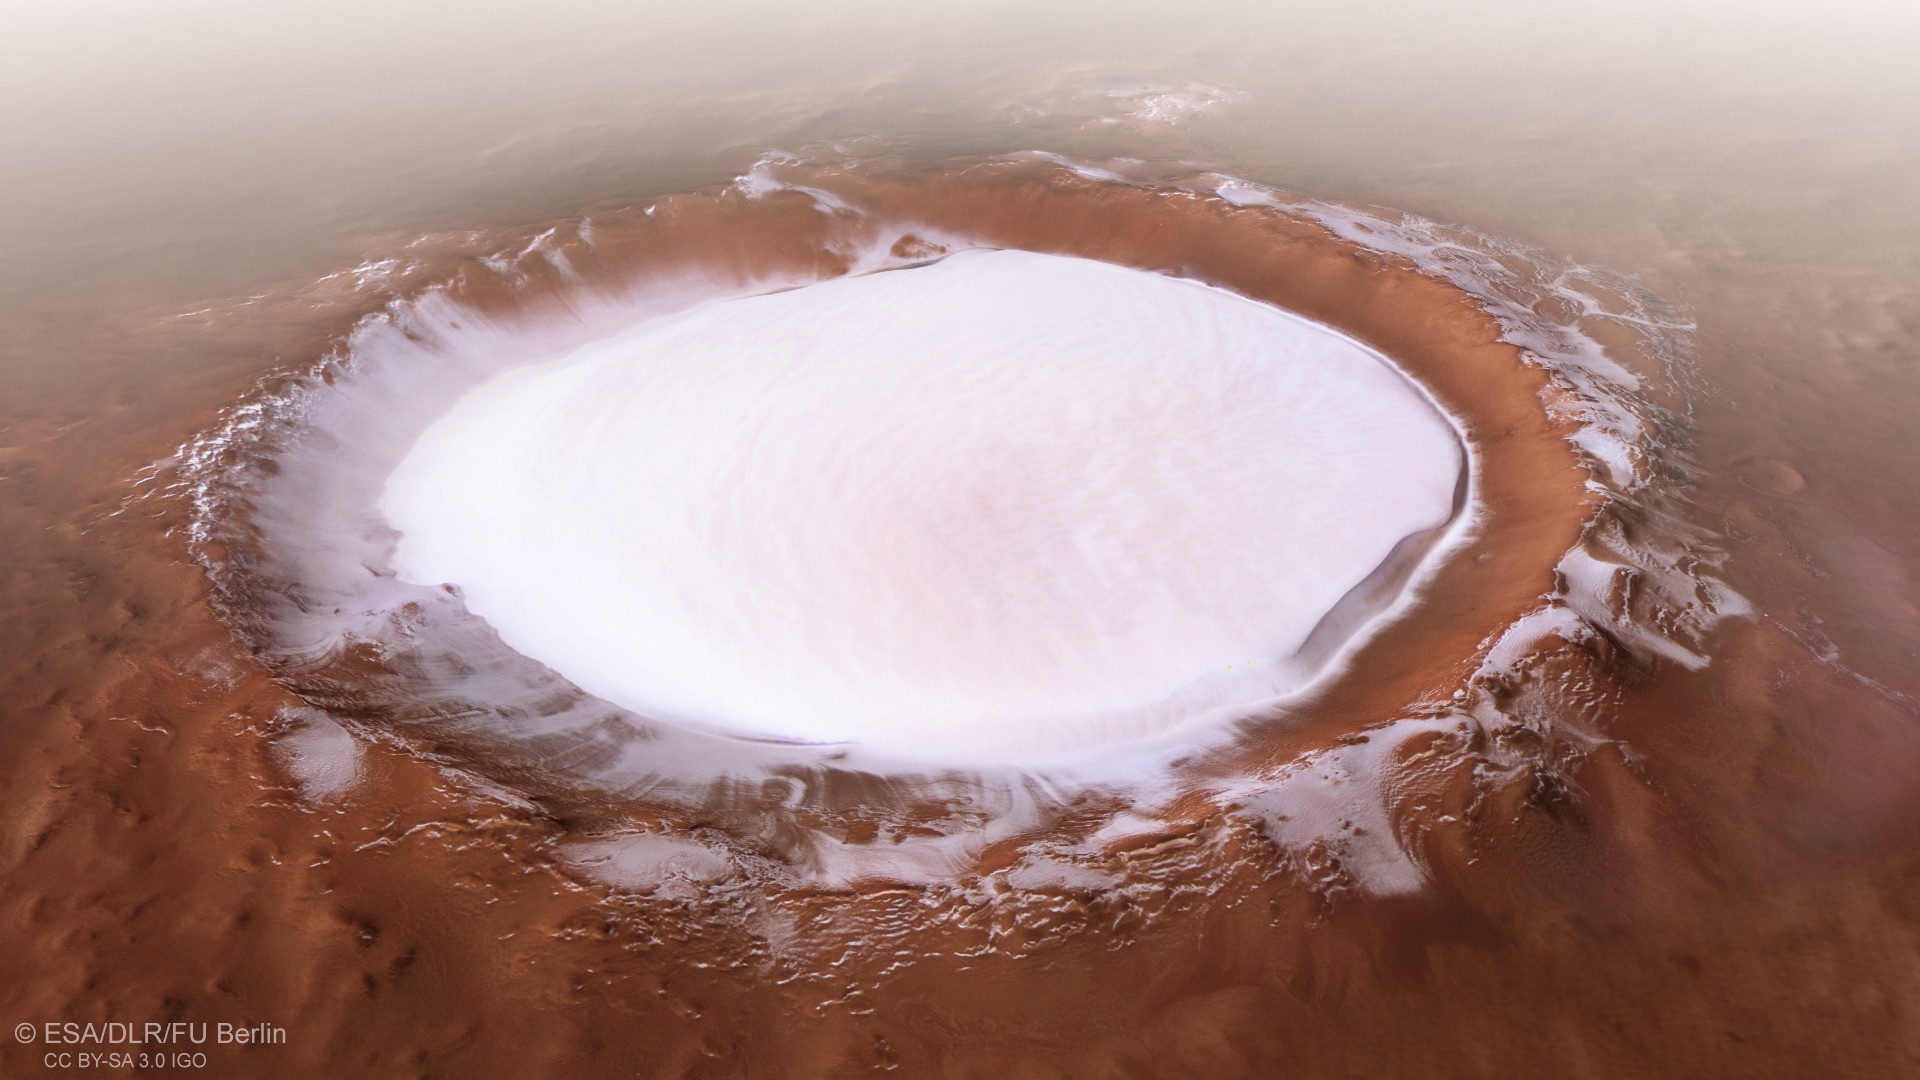 3.7 kilometers thick: Scientists find giant ice deposits on Mars